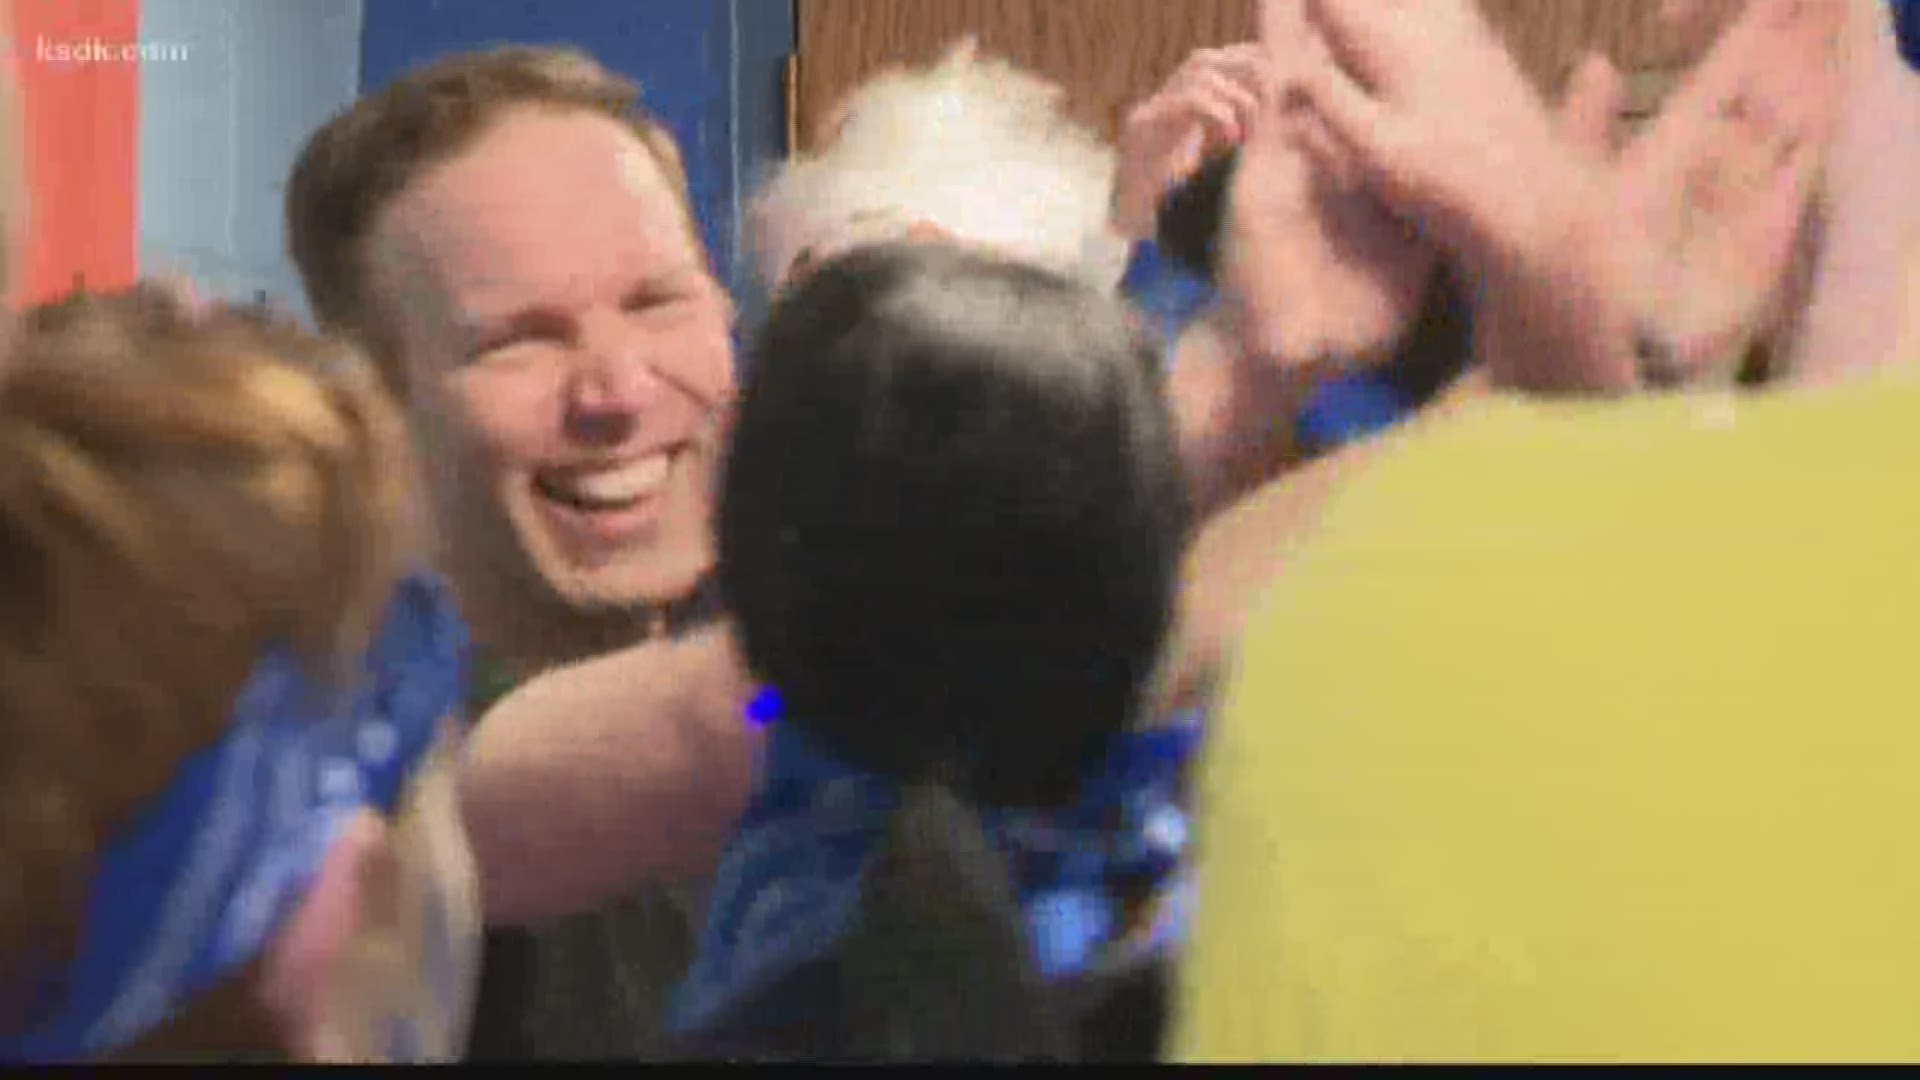 Right when he walked into the gym, several students ran up to him and tackled him with hugs.